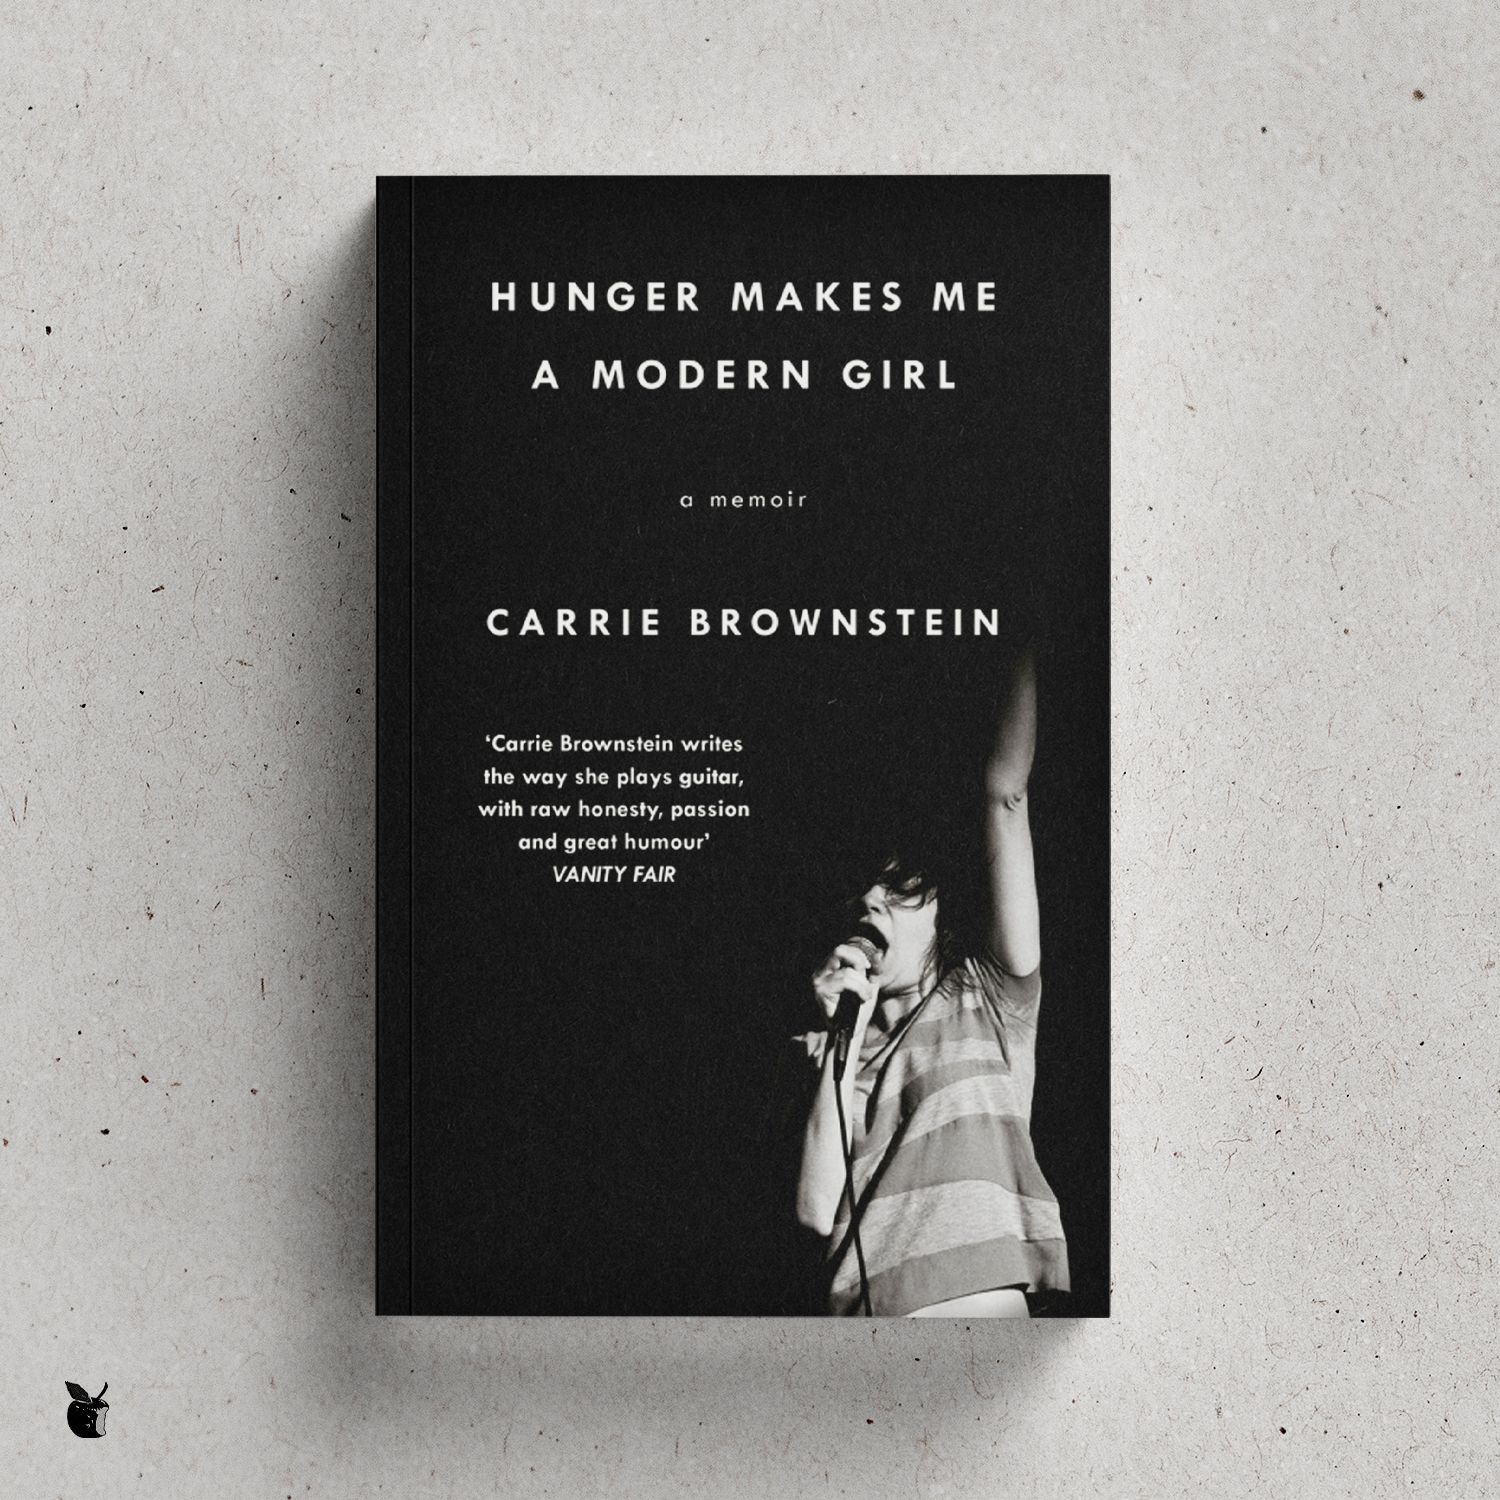 Hunger Makes me a Modern Girl by Carrie Brownstein